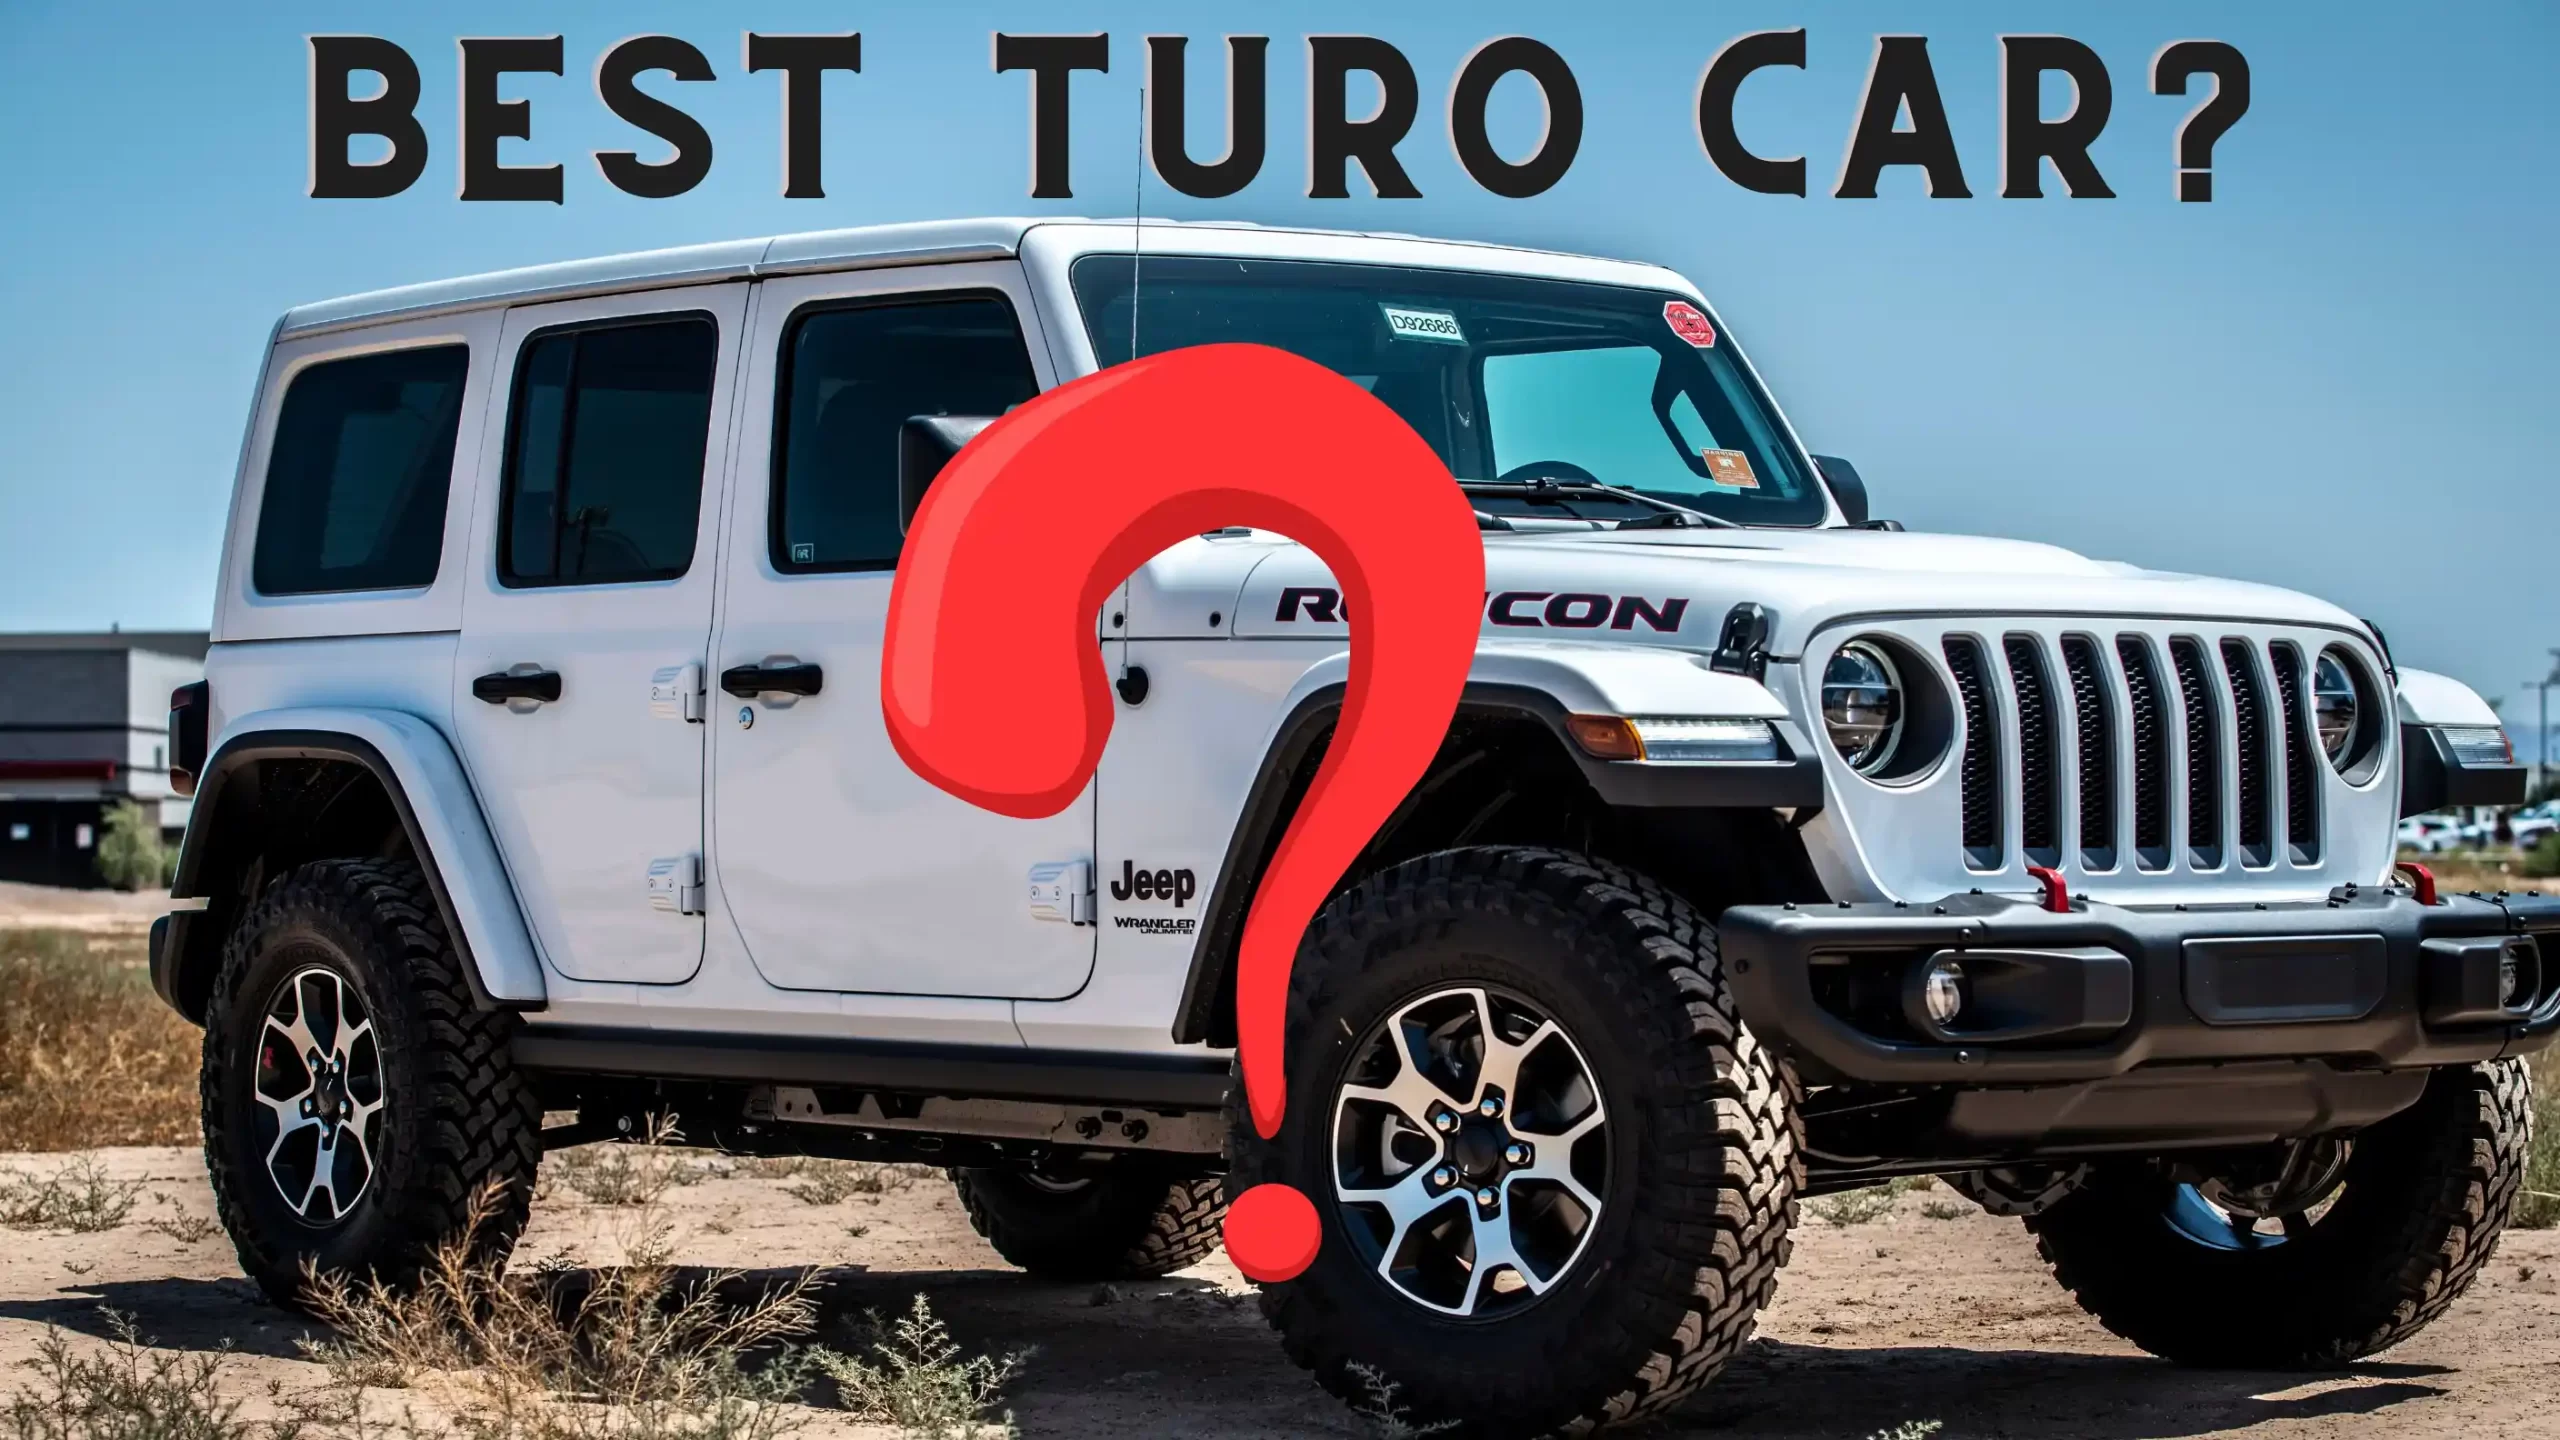 Best Turo Car To Host? This May Surprise You.